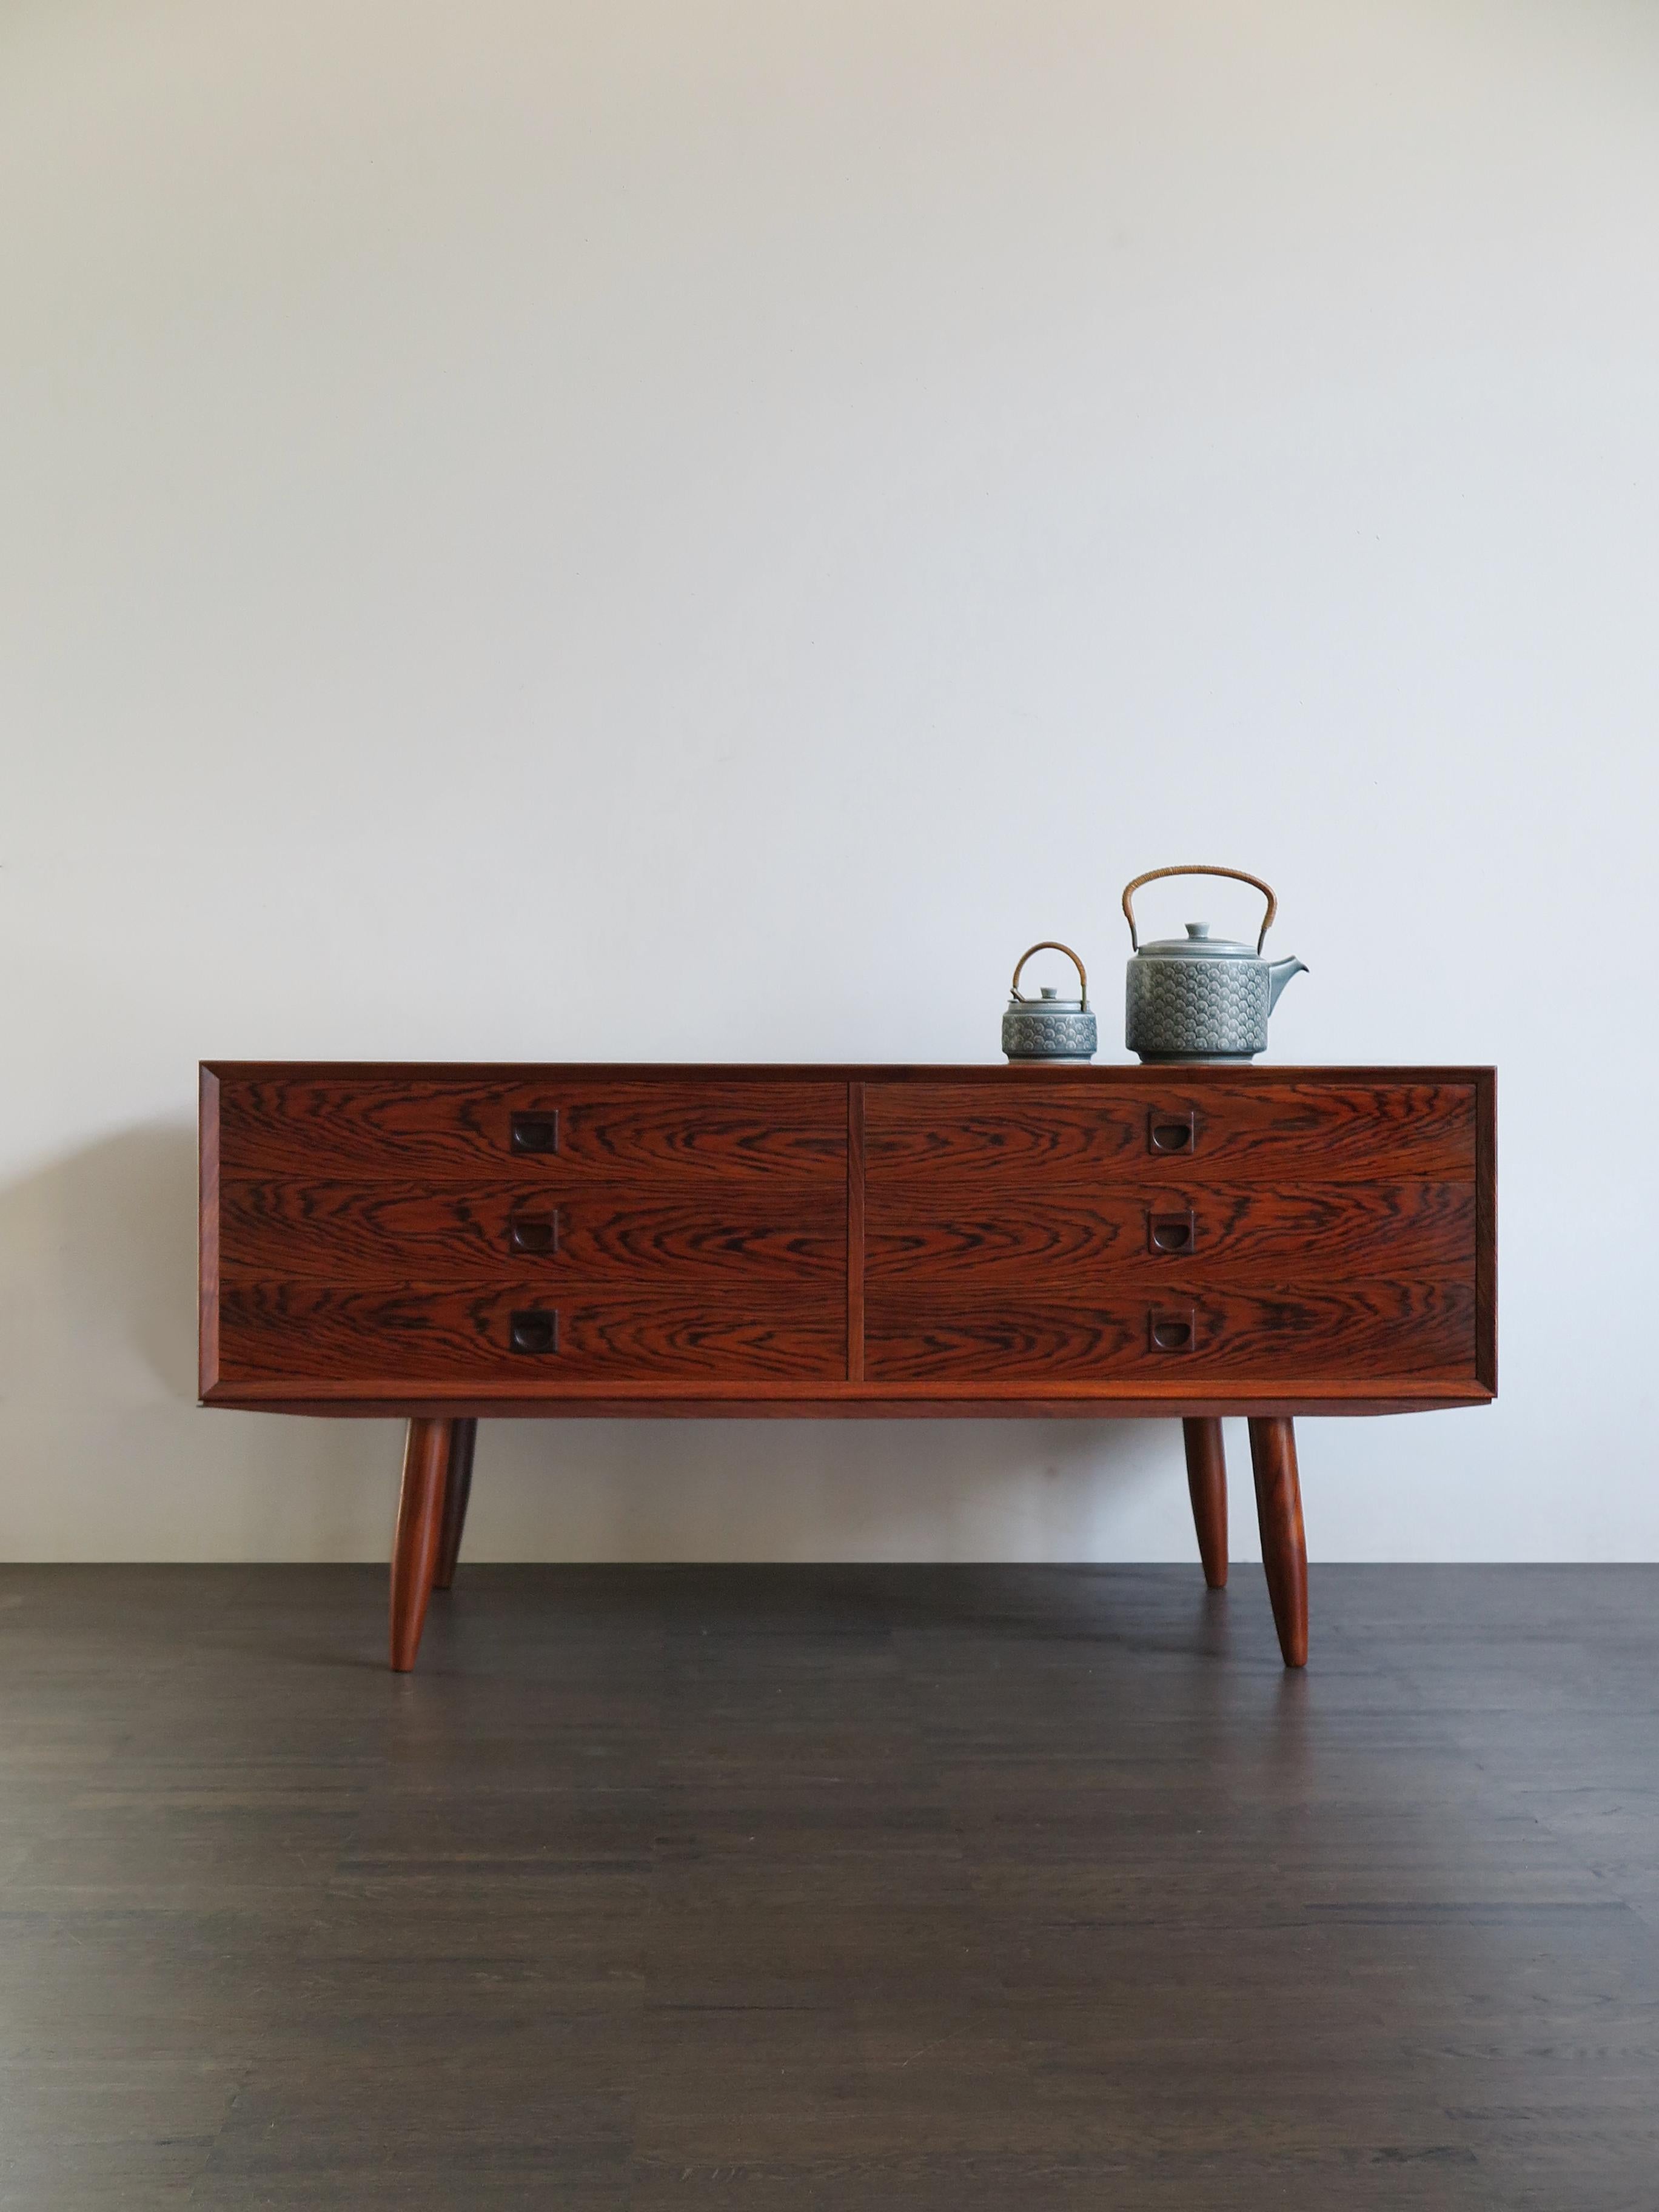 Scandinavian dark wood chest produced in Denmark from 1950s.

Please note that the item is original of the period and this shows normal signs of age and use.